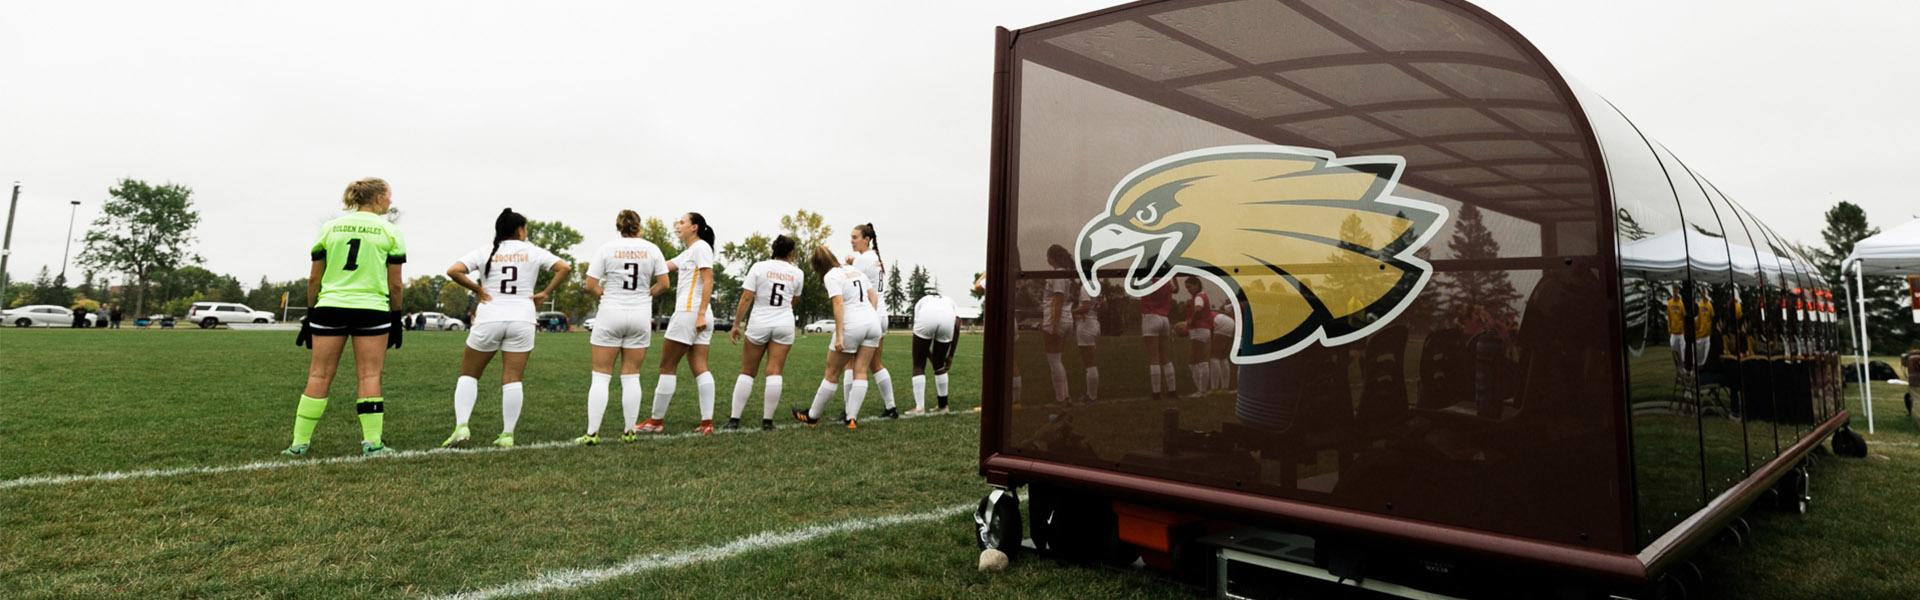 Women's soccer players standing on the sideline with the Golden Eagle logo on the dugout